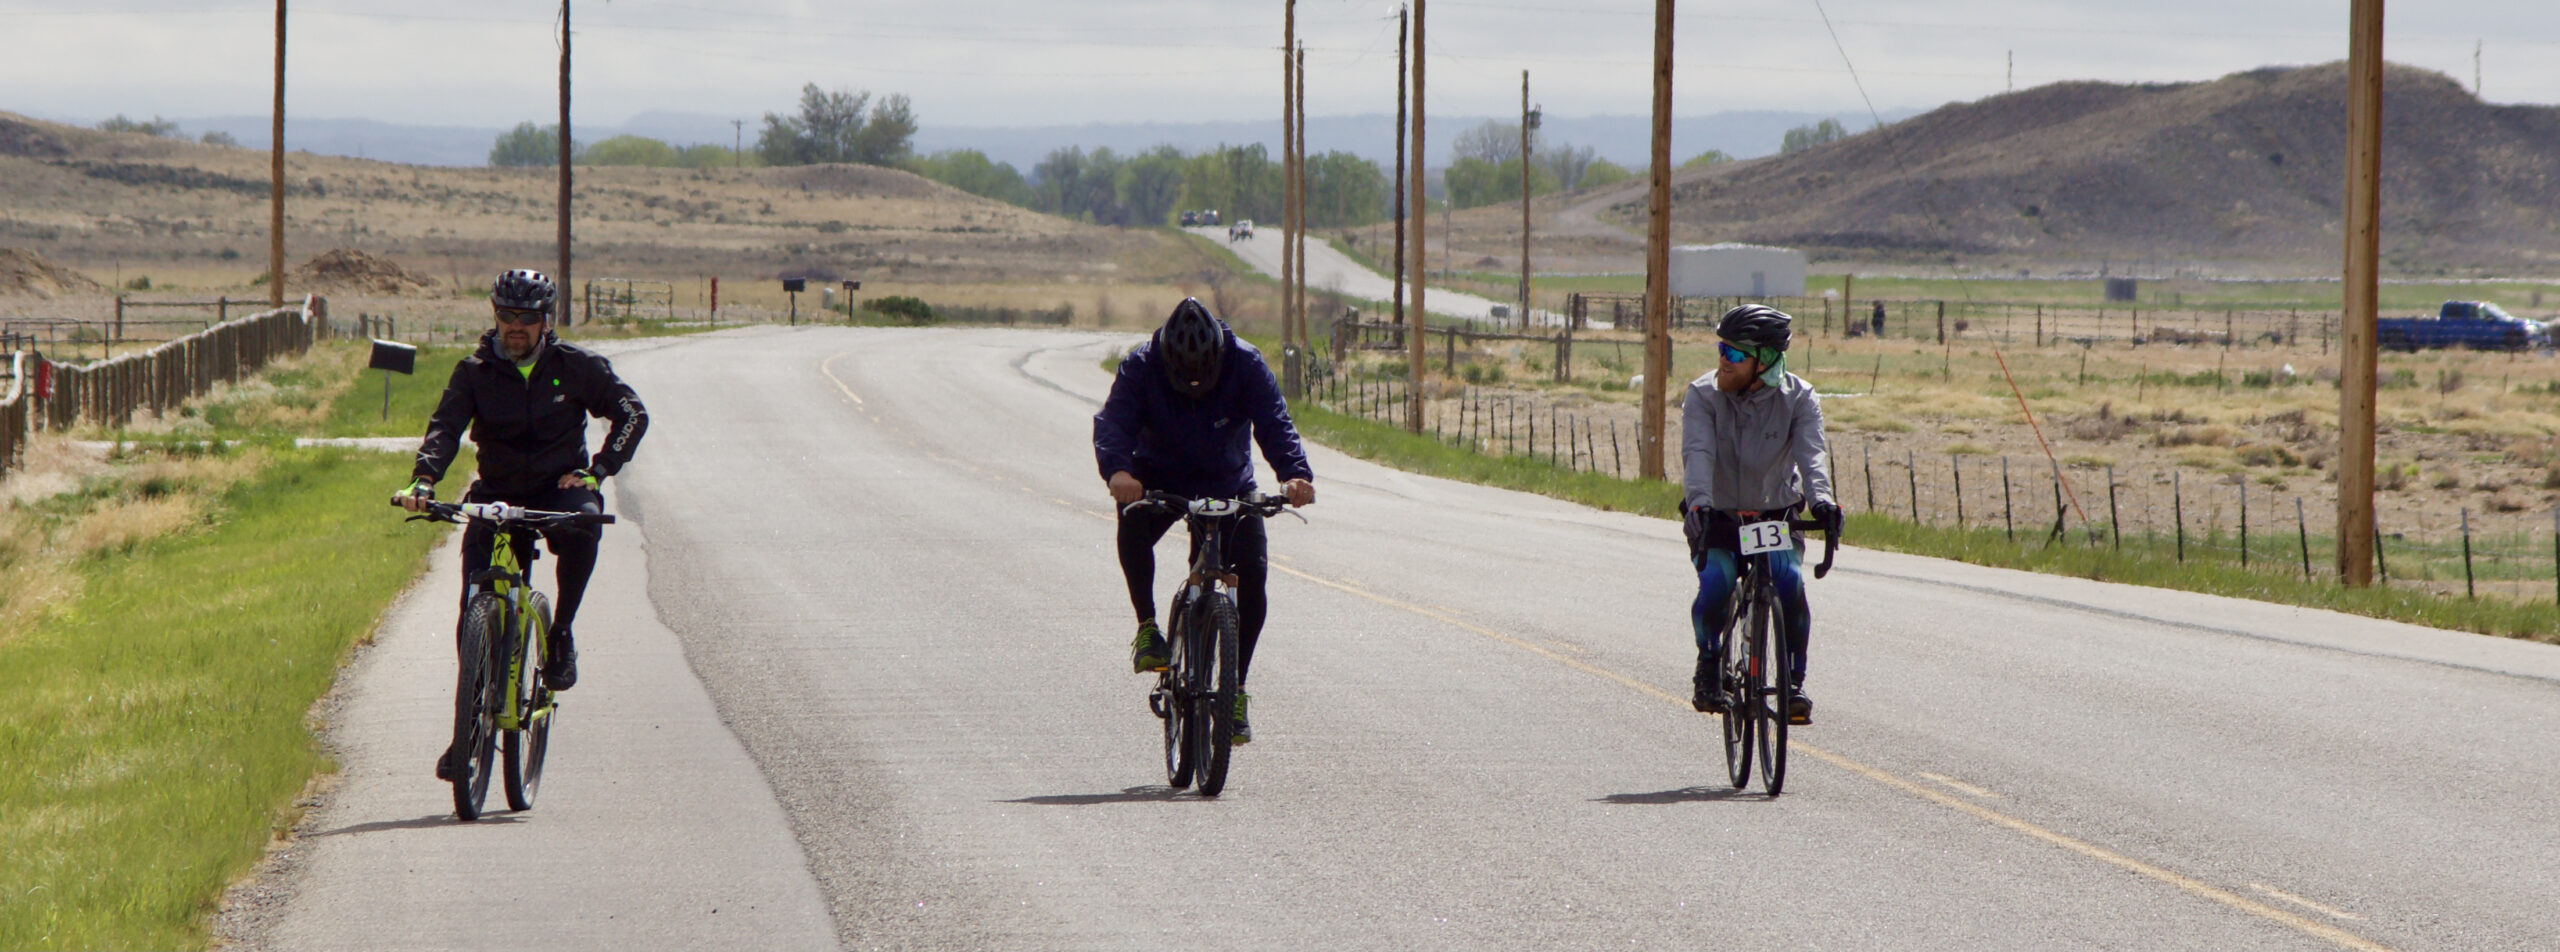 Three people biking on a street outside of town with mountains in the background.